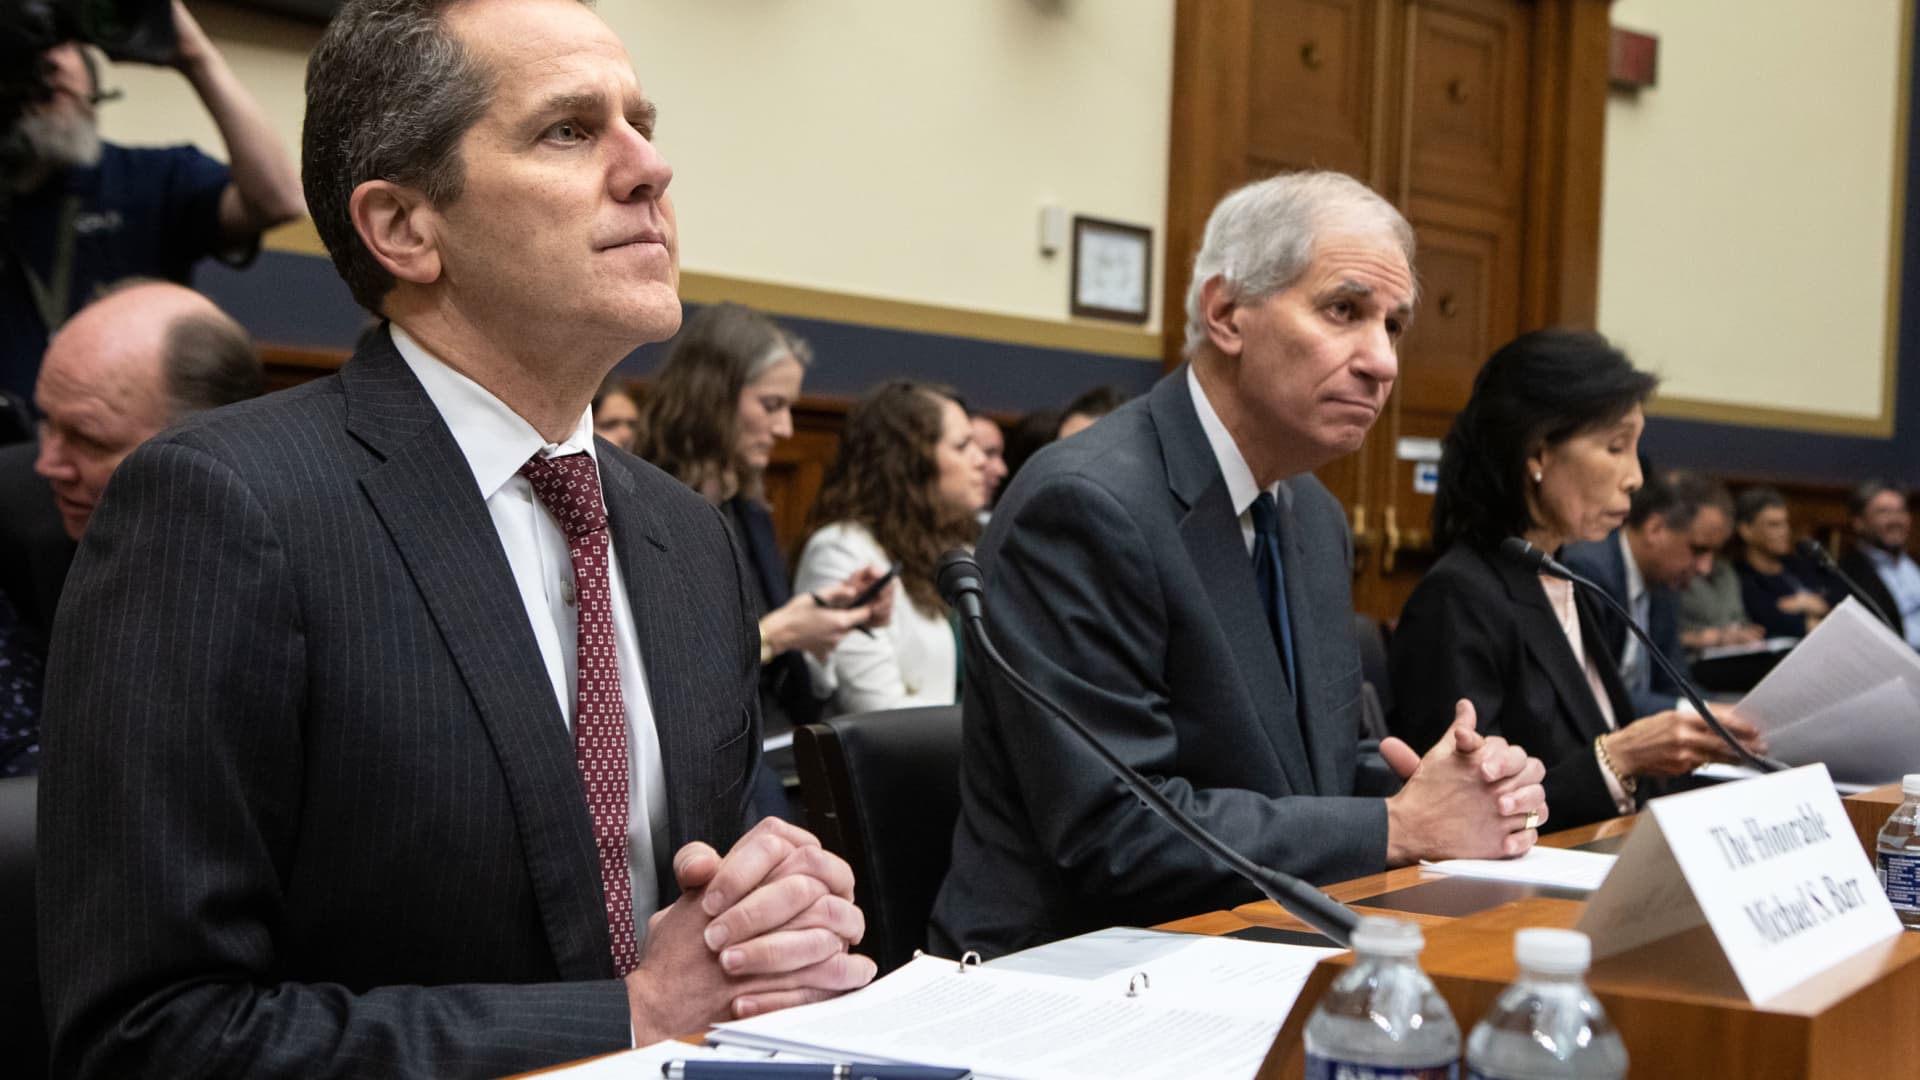 Michael Barr, vice chair for supervision at the US Federal Reserve, left, and Martin Gruenberg, chairman of the Federal Deposit Insurance Corp., and Nellie Liang, under secretary for domestic finance at the US Treasury, during a House Financial Services Committee hearing in Washington, DC, on Wednesday, March 29, 2023.